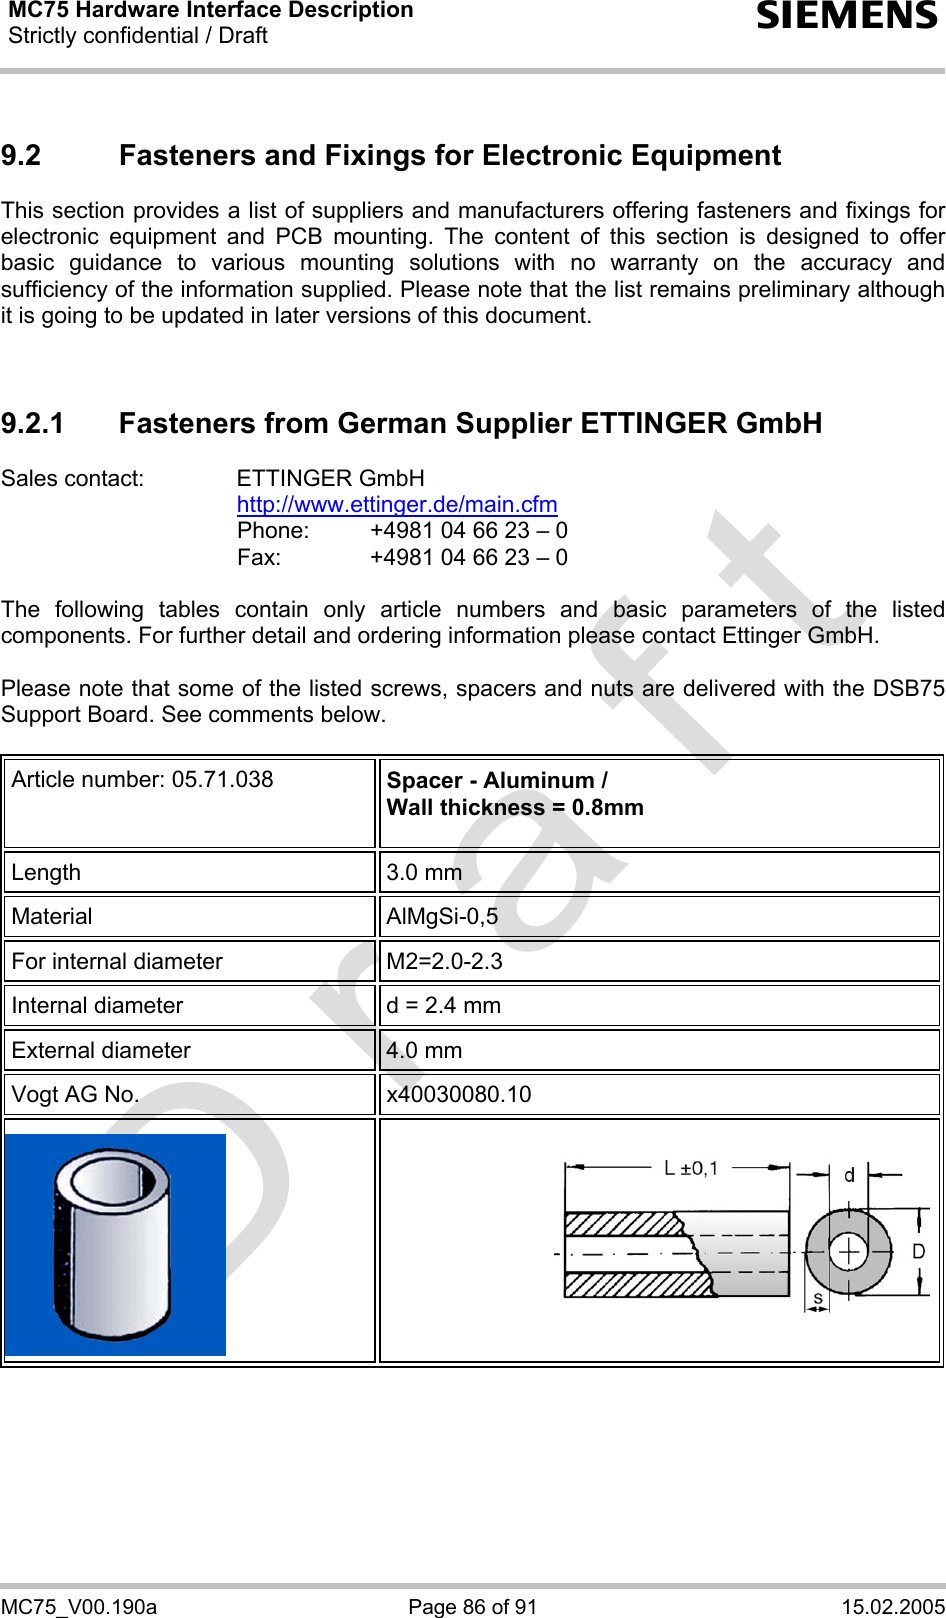 MC75 Hardware Interface Description Strictly confidential / Draft  s MC75_V00.190a  Page 86 of 91  15.02.2005 9.2  Fasteners and Fixings for Electronic Equipment This section provides a list of suppliers and manufacturers offering fasteners and fixings for electronic equipment and PCB mounting. The content of this section is designed to offer basic guidance to various mounting solutions with no warranty on the accuracy and sufficiency of the information supplied. Please note that the list remains preliminary although it is going to be updated in later versions of this document.   9.2.1  Fasteners from German Supplier ETTINGER GmbH Sales contact:  ETTINGER GmbH  http://www.ettinger.de/main.cfm   Phone:   +4981 04 66 23 – 0   Fax:    +4981 04 66 23 – 0  The following tables contain only article numbers and basic parameters of the listed components. For further detail and ordering information please contact Ettinger GmbH.   Please note that some of the listed screws, spacers and nuts are delivered with the DSB75 Support Board. See comments below.  Article number: 05.71.038  Spacer - Aluminum / Wall thickness = 0.8mm  Length 3.0 mm Material AlMgSi-0,5 For internal diameter  M2=2.0-2.3  Internal diameter  d = 2.4 mm External diameter  4.0 mm Vogt AG No.  x40030080.10      